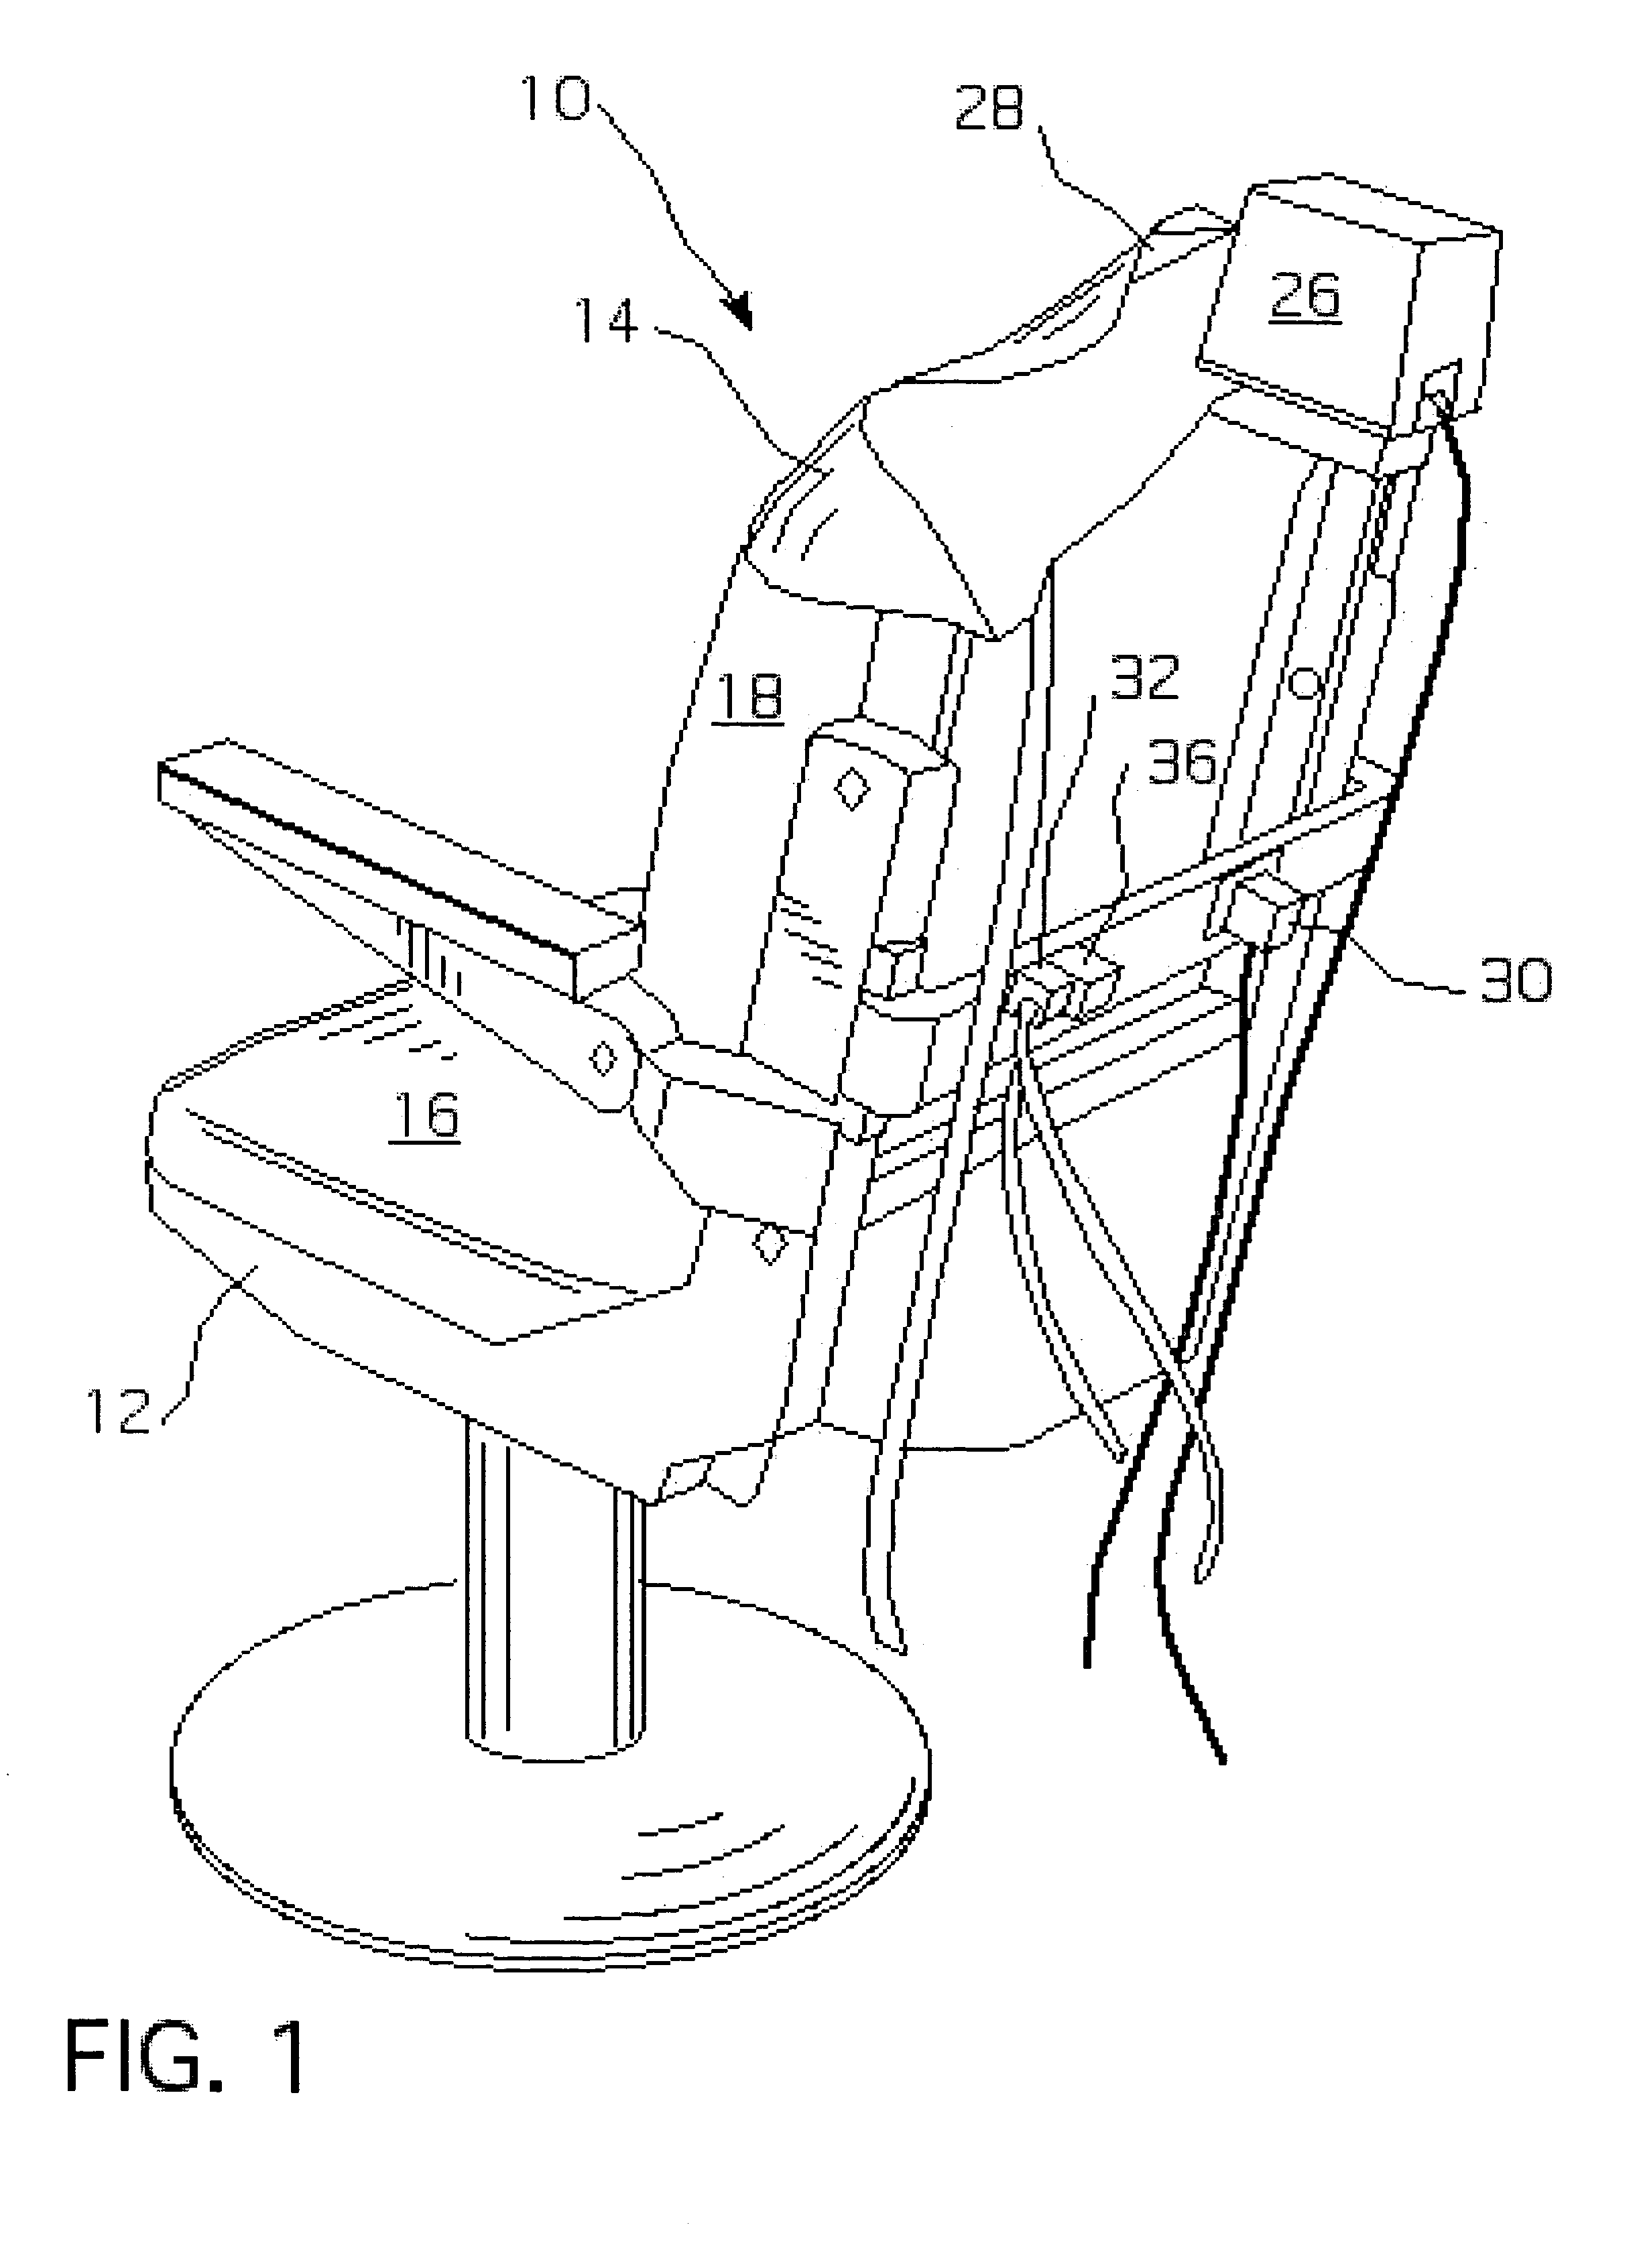 Apparatus and method for postural assessment while performing cognitive tasks